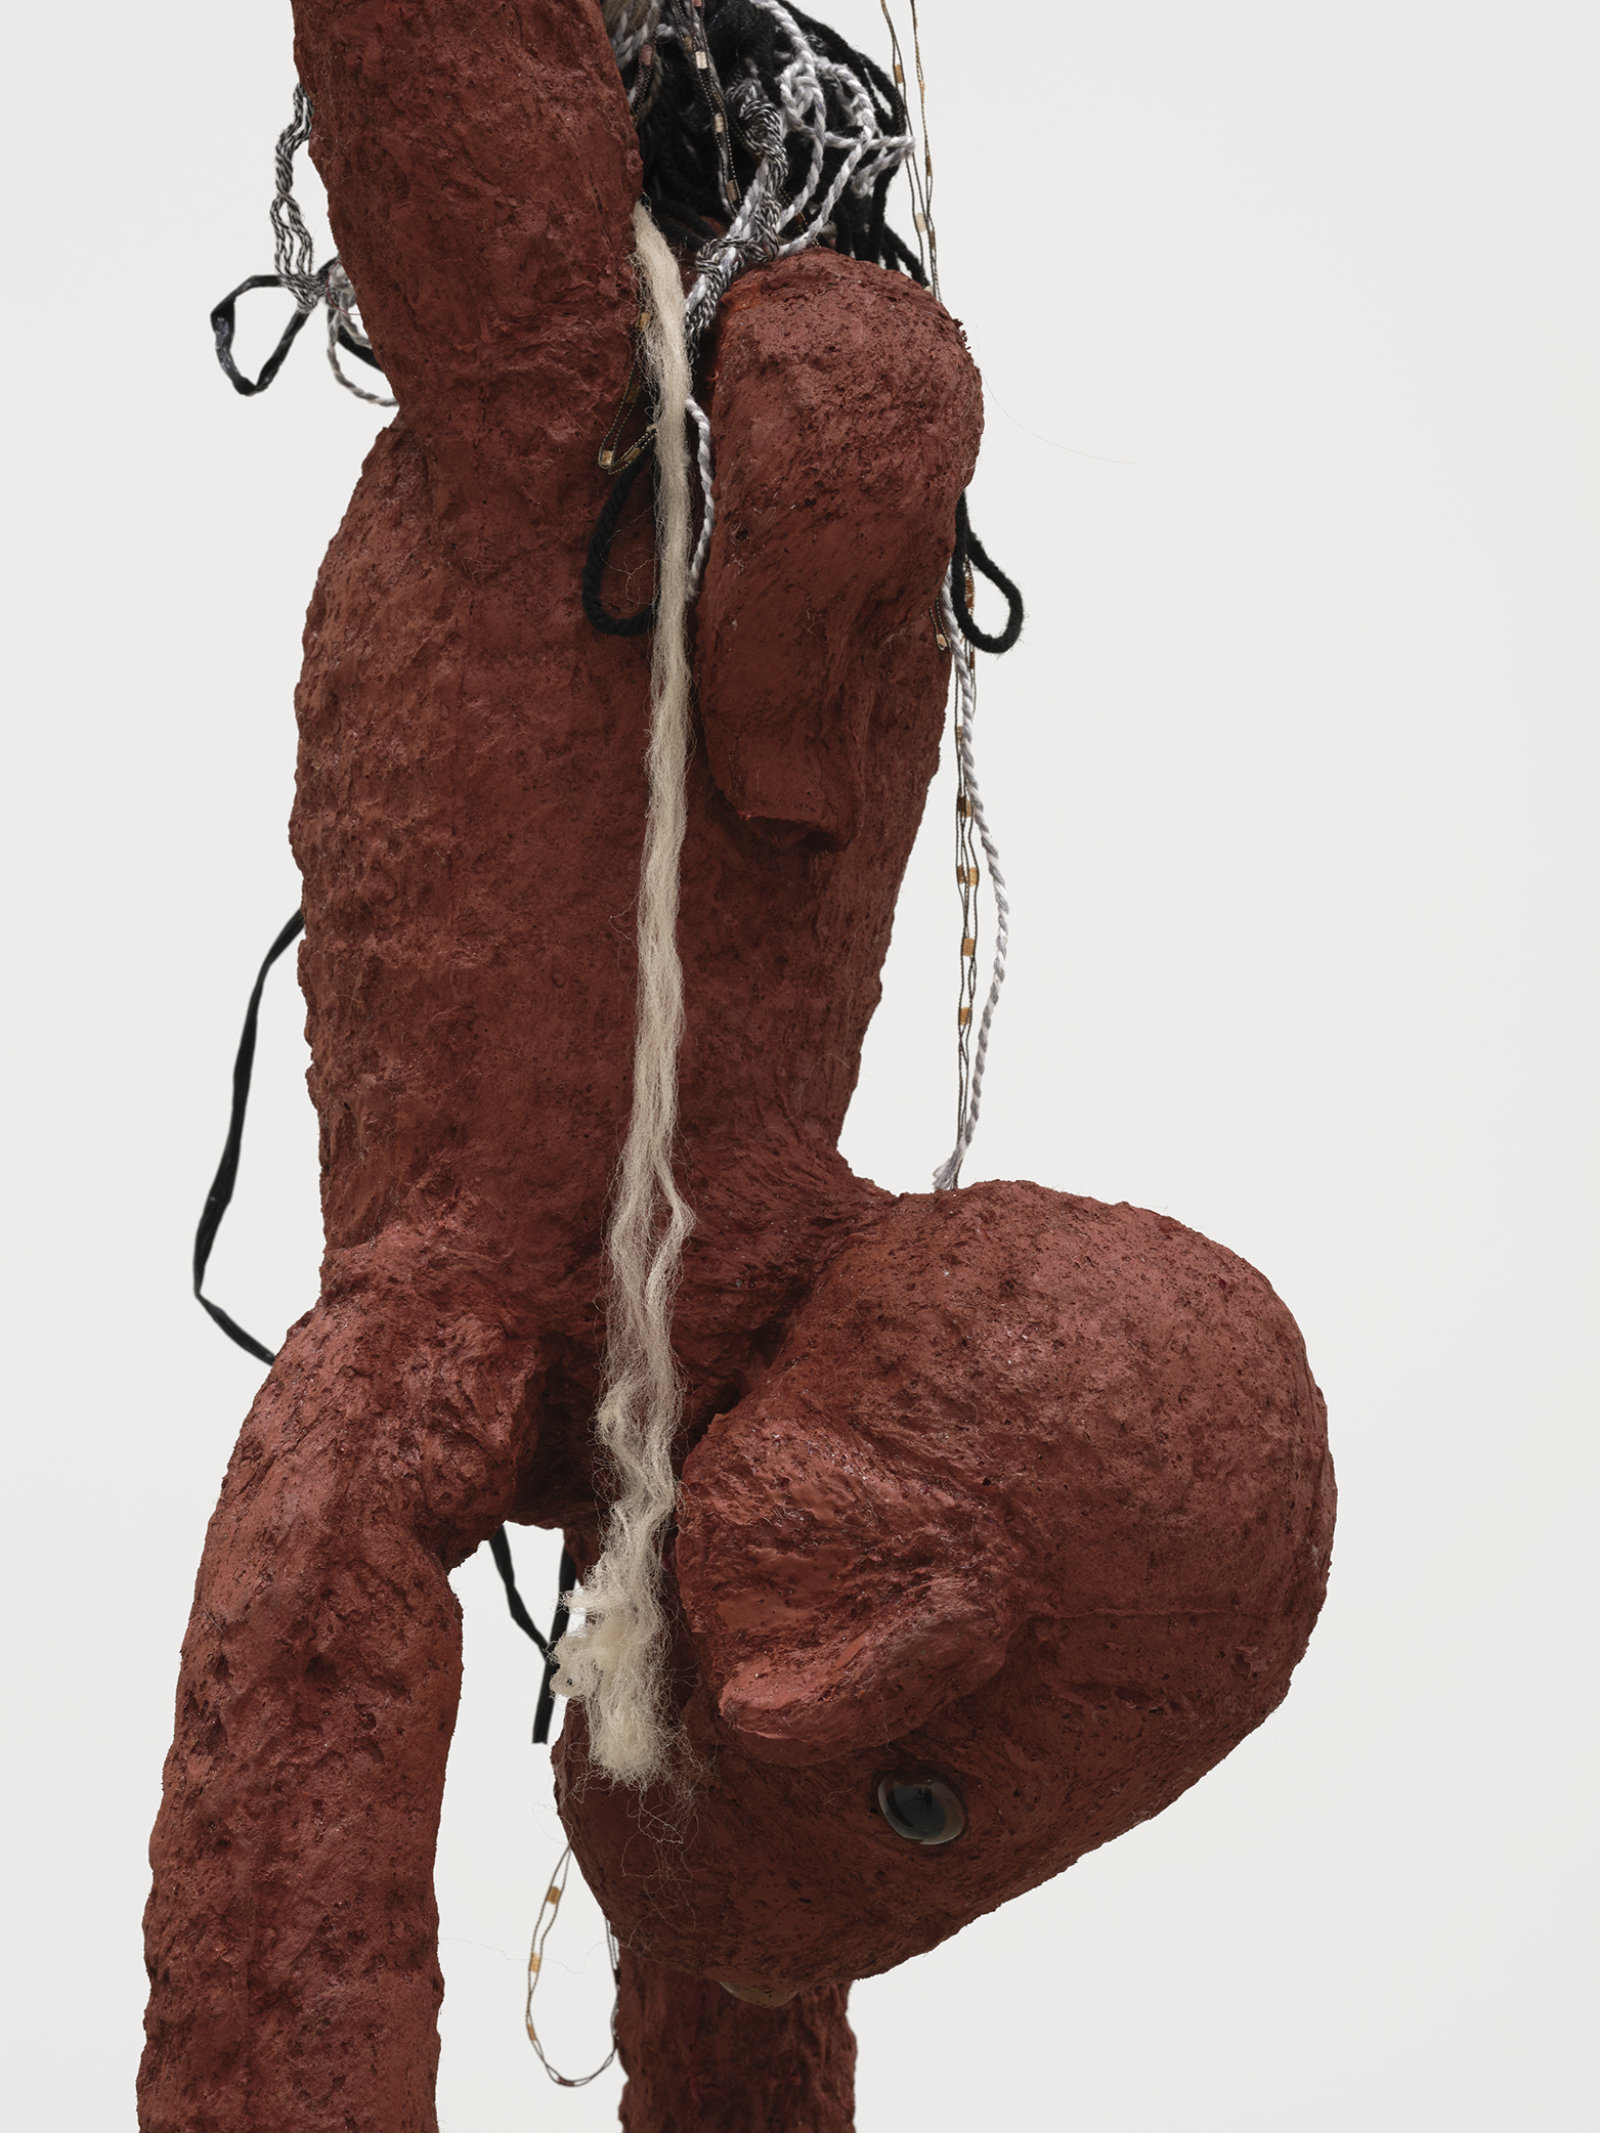 Liz Magor, Delivery (red) (detail), 2018, silicone rubber, textiles, twine, 325 x 26 x 23 in. (826 x 66 x 58 cm)